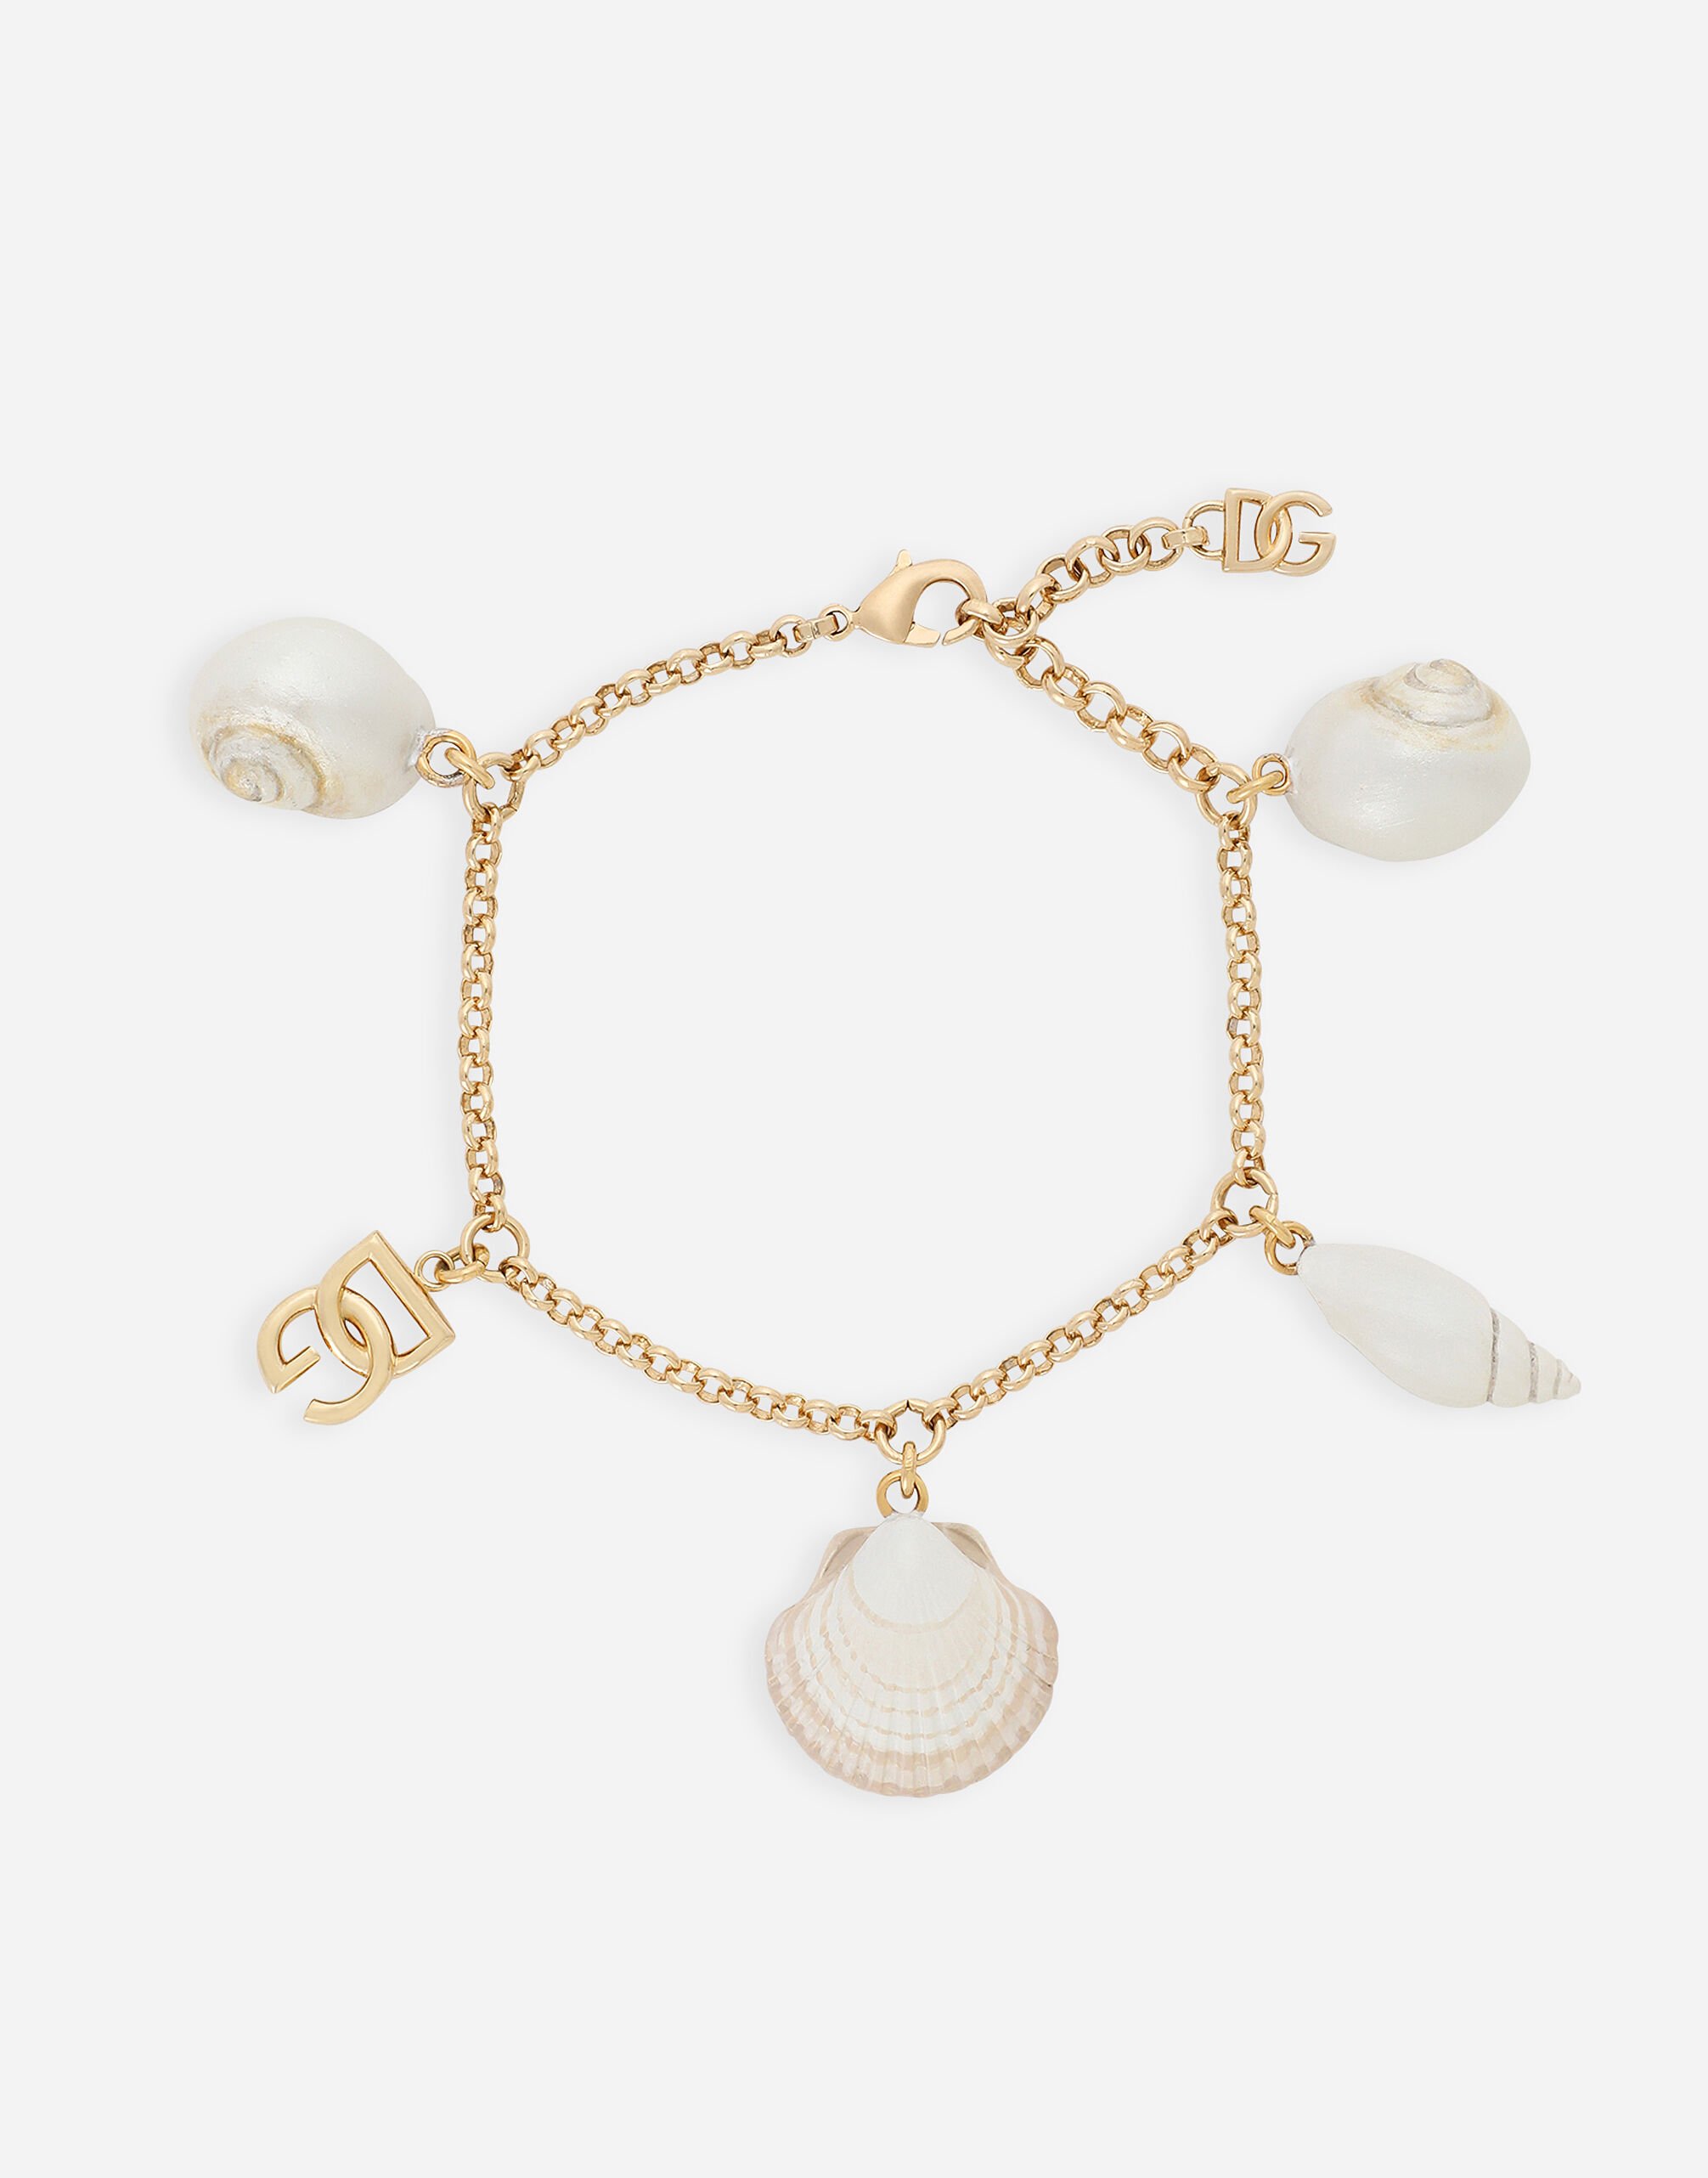 ${brand} Bracelet with DG logo and shell charms ${colorDescription} ${masterID}